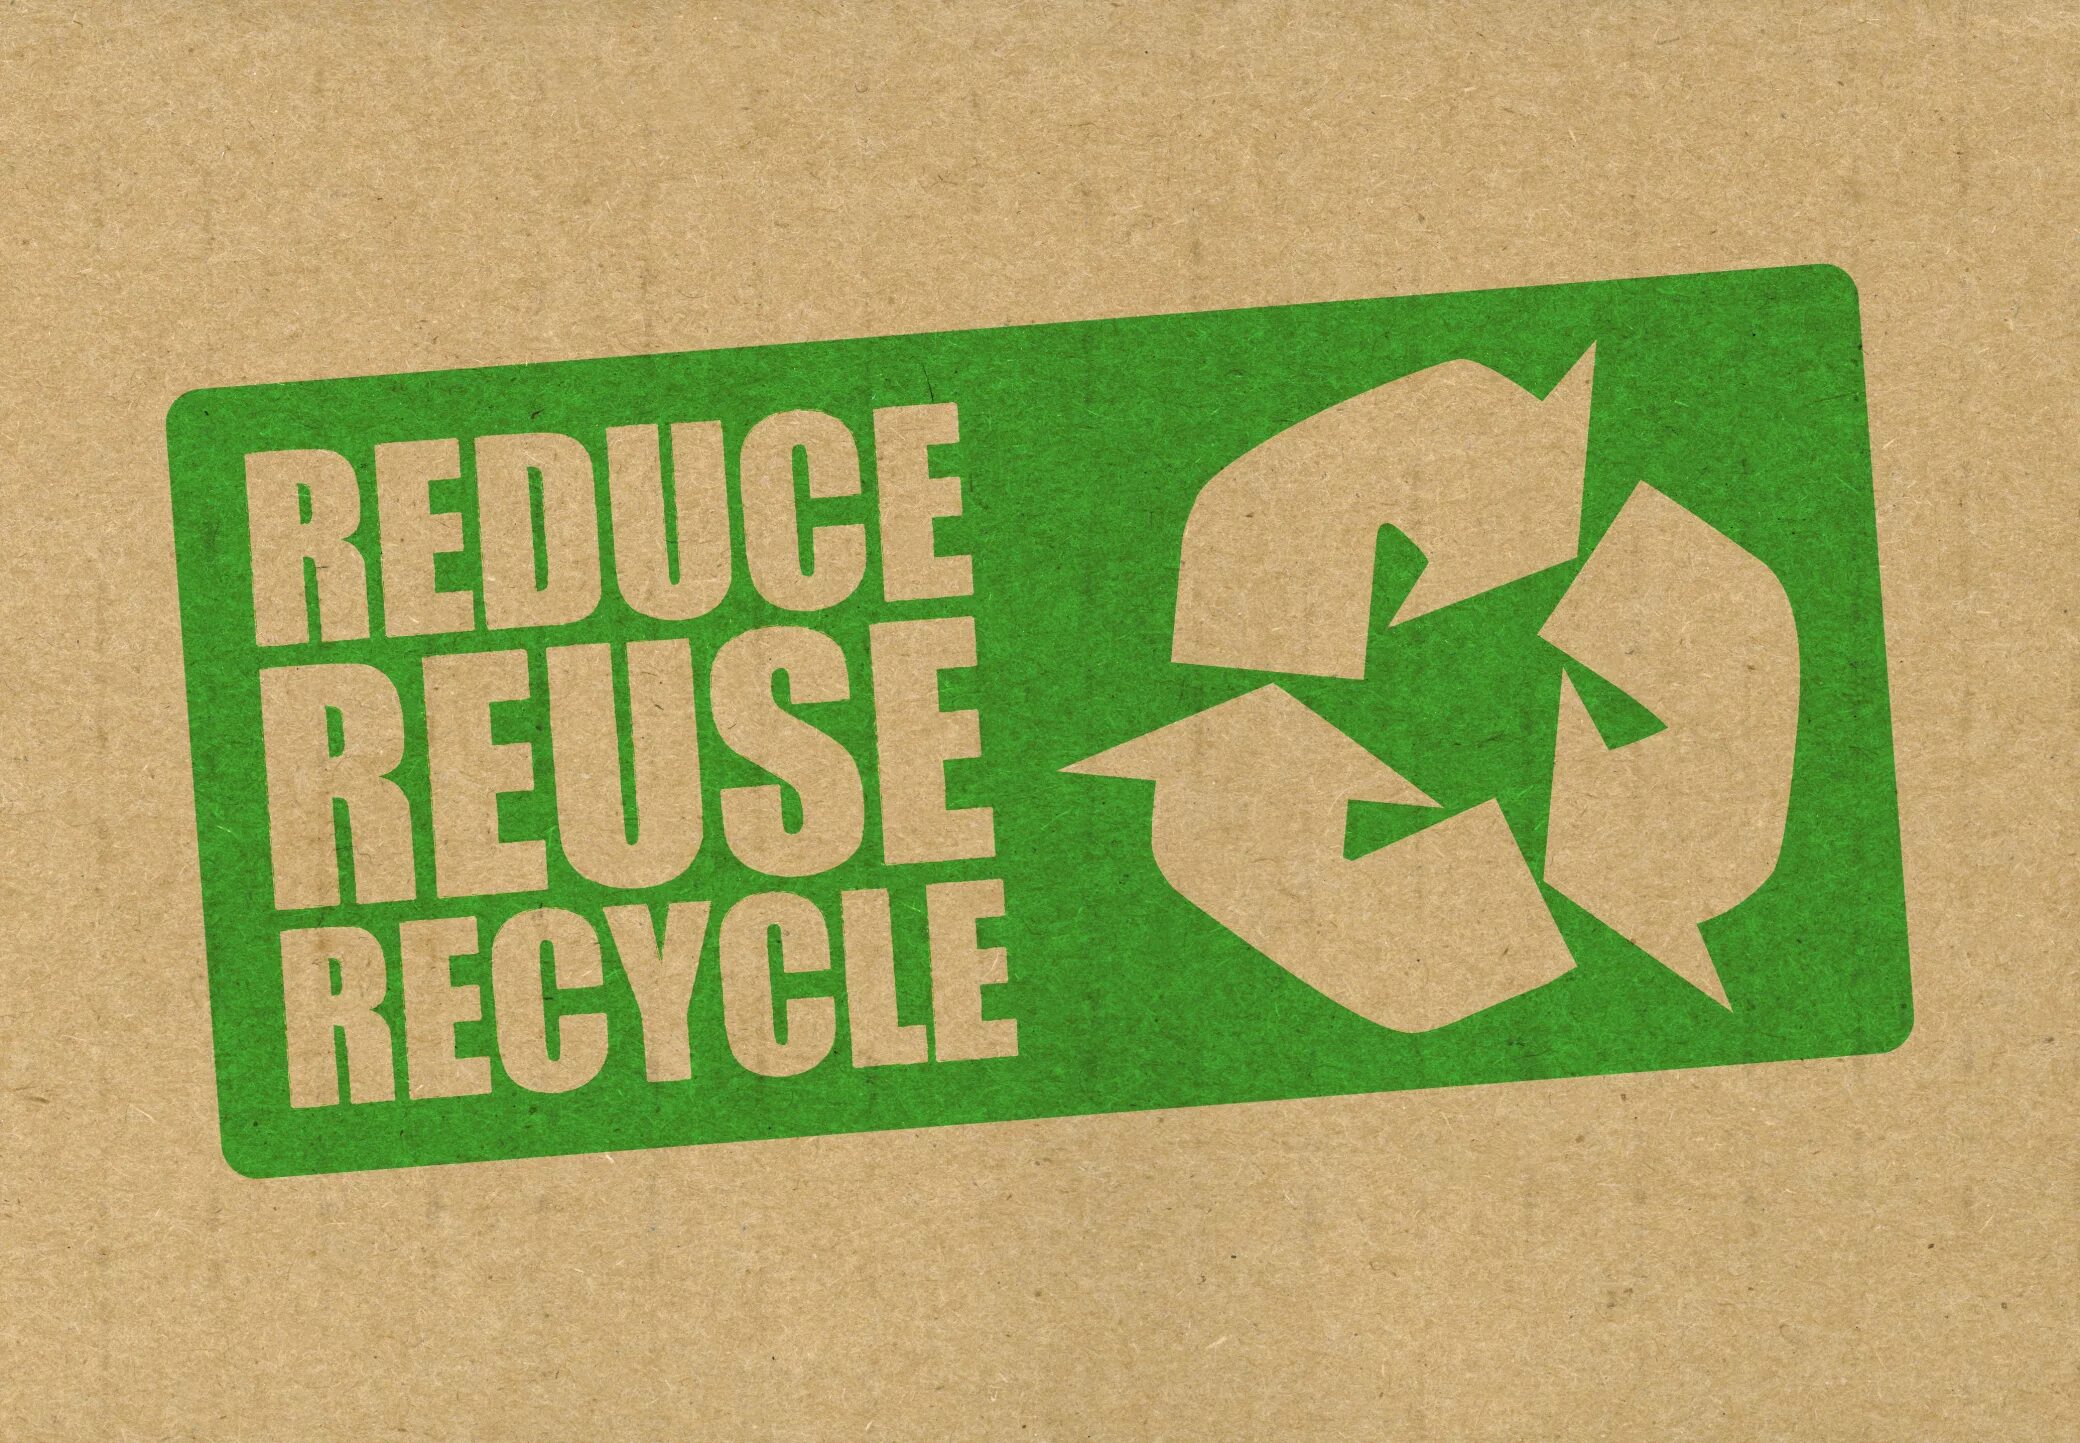 Reduce reuse recycle. Reduce экология. Recycling reuse. Reduce reuse recycle картинки. Reduce only